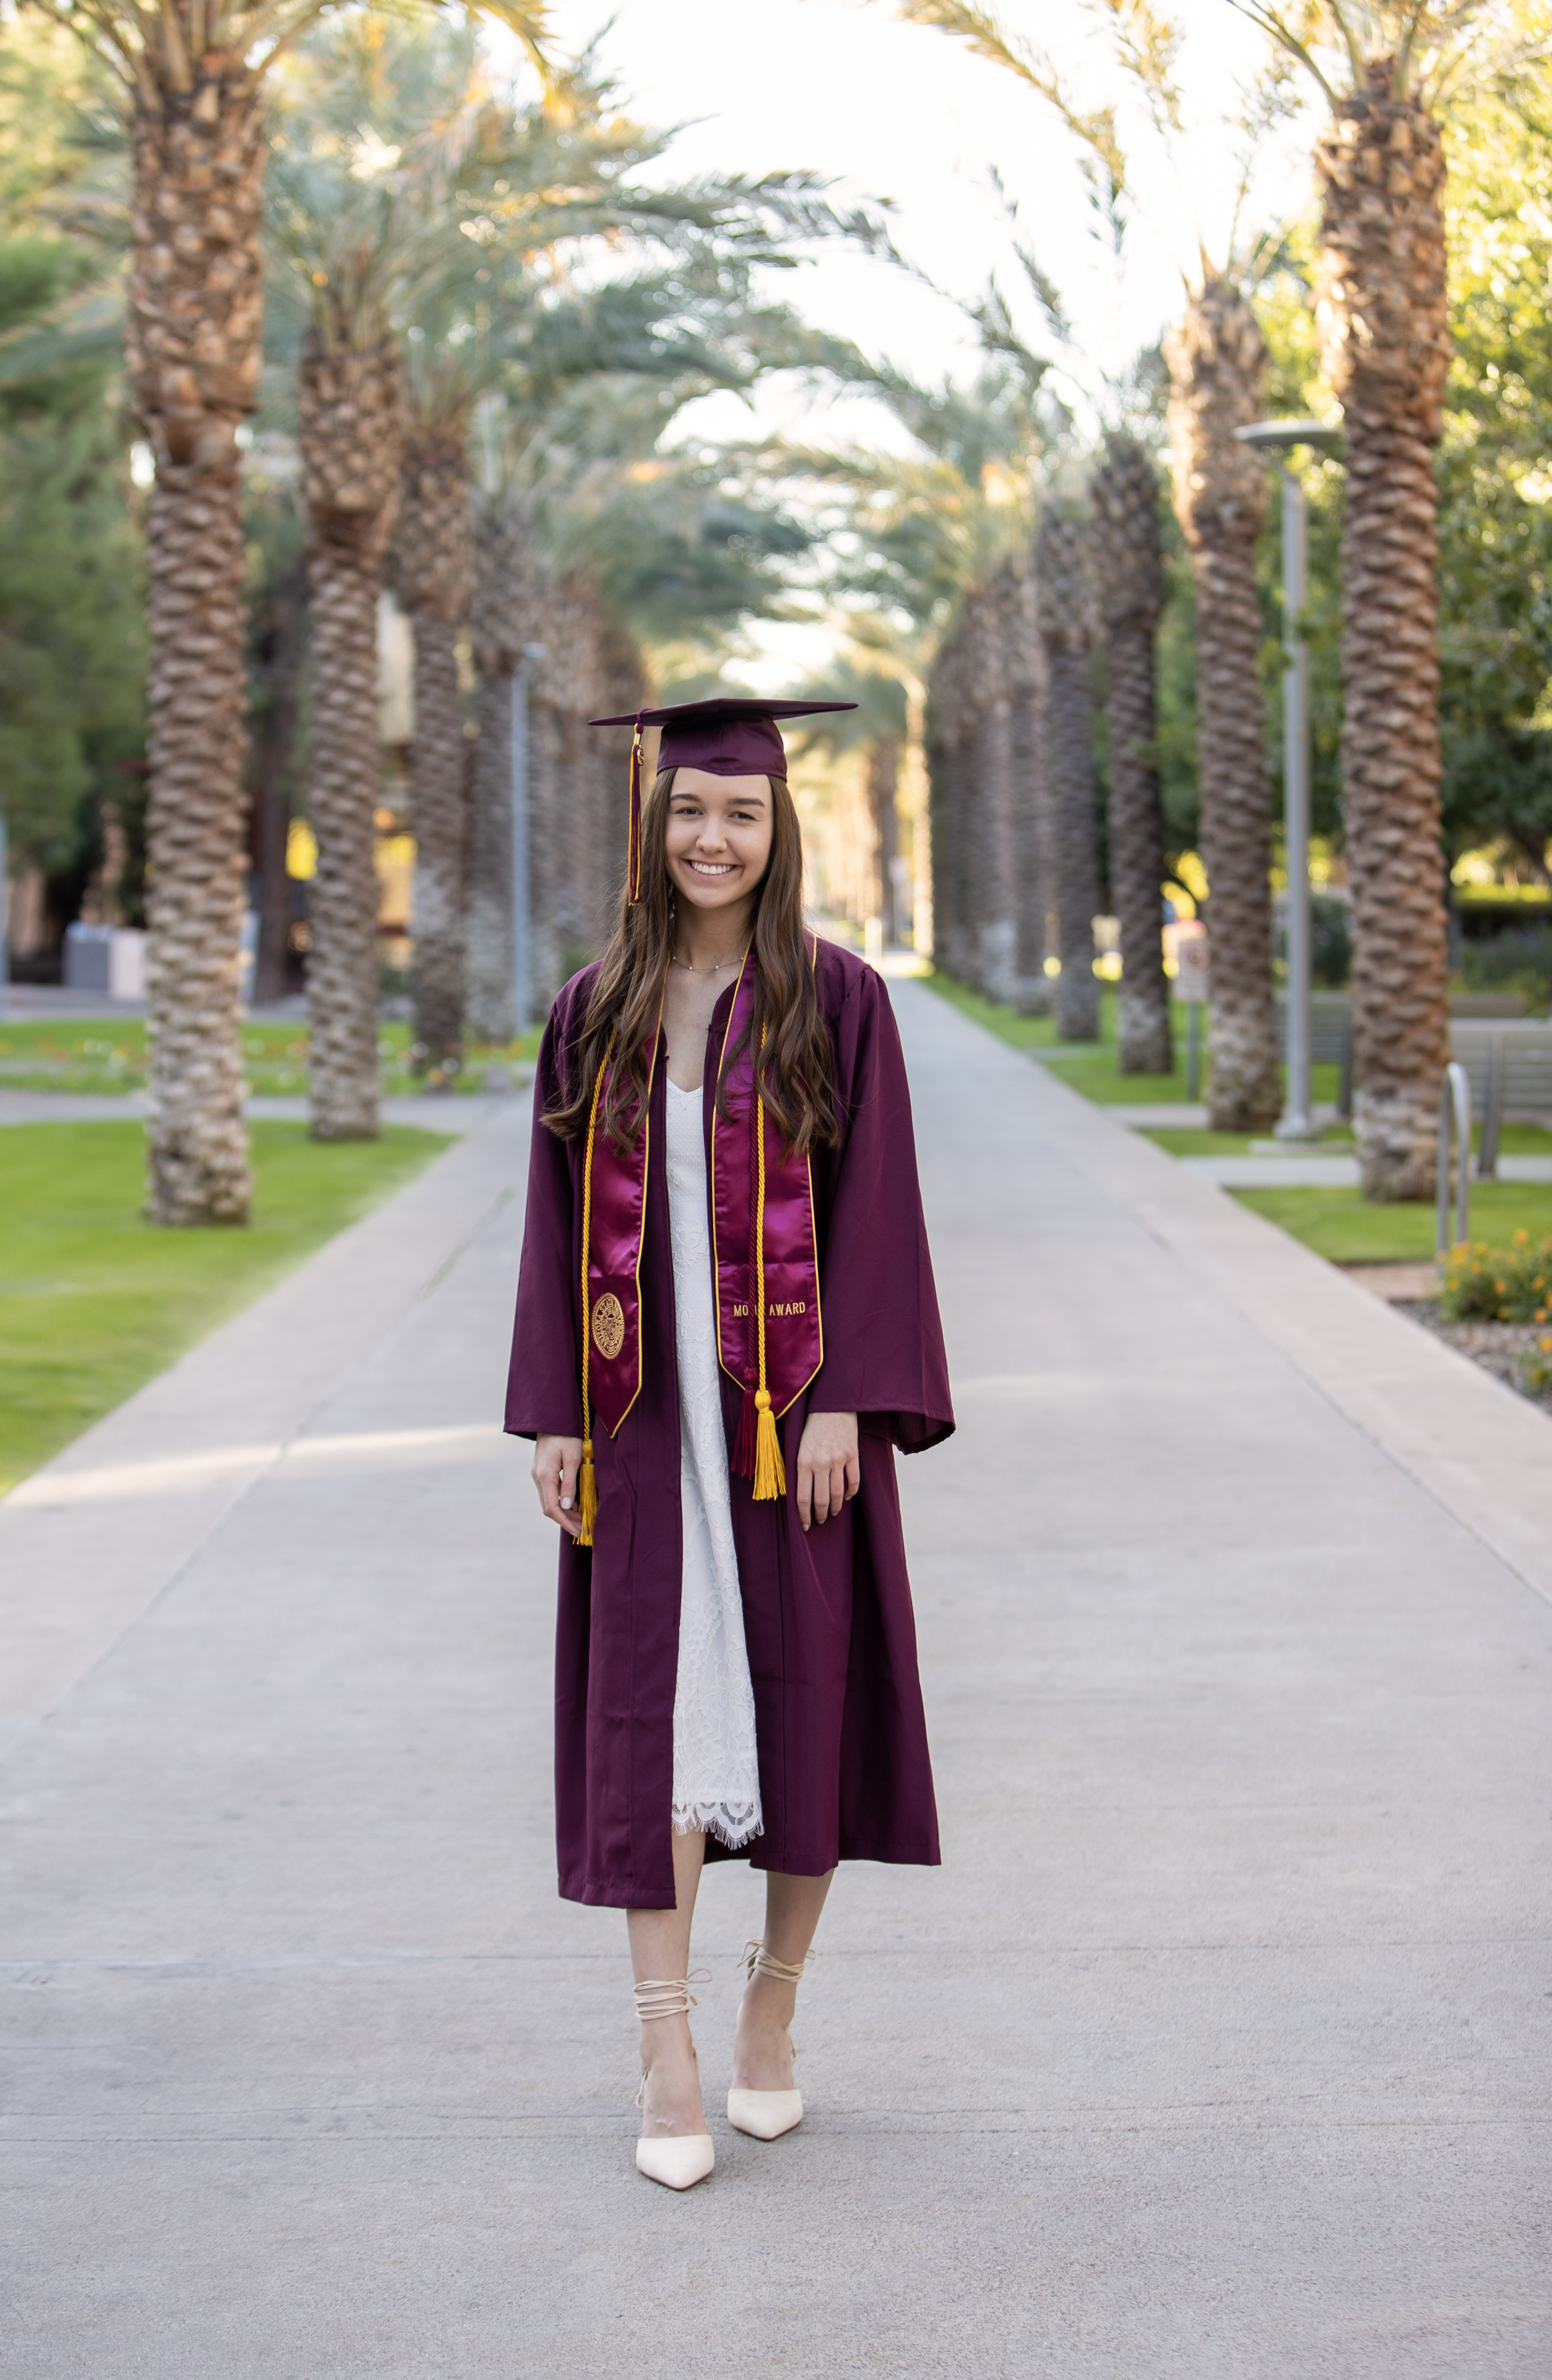 Graduate Claire Muranaka poses in her cap and gown on the palm walk at ASU.